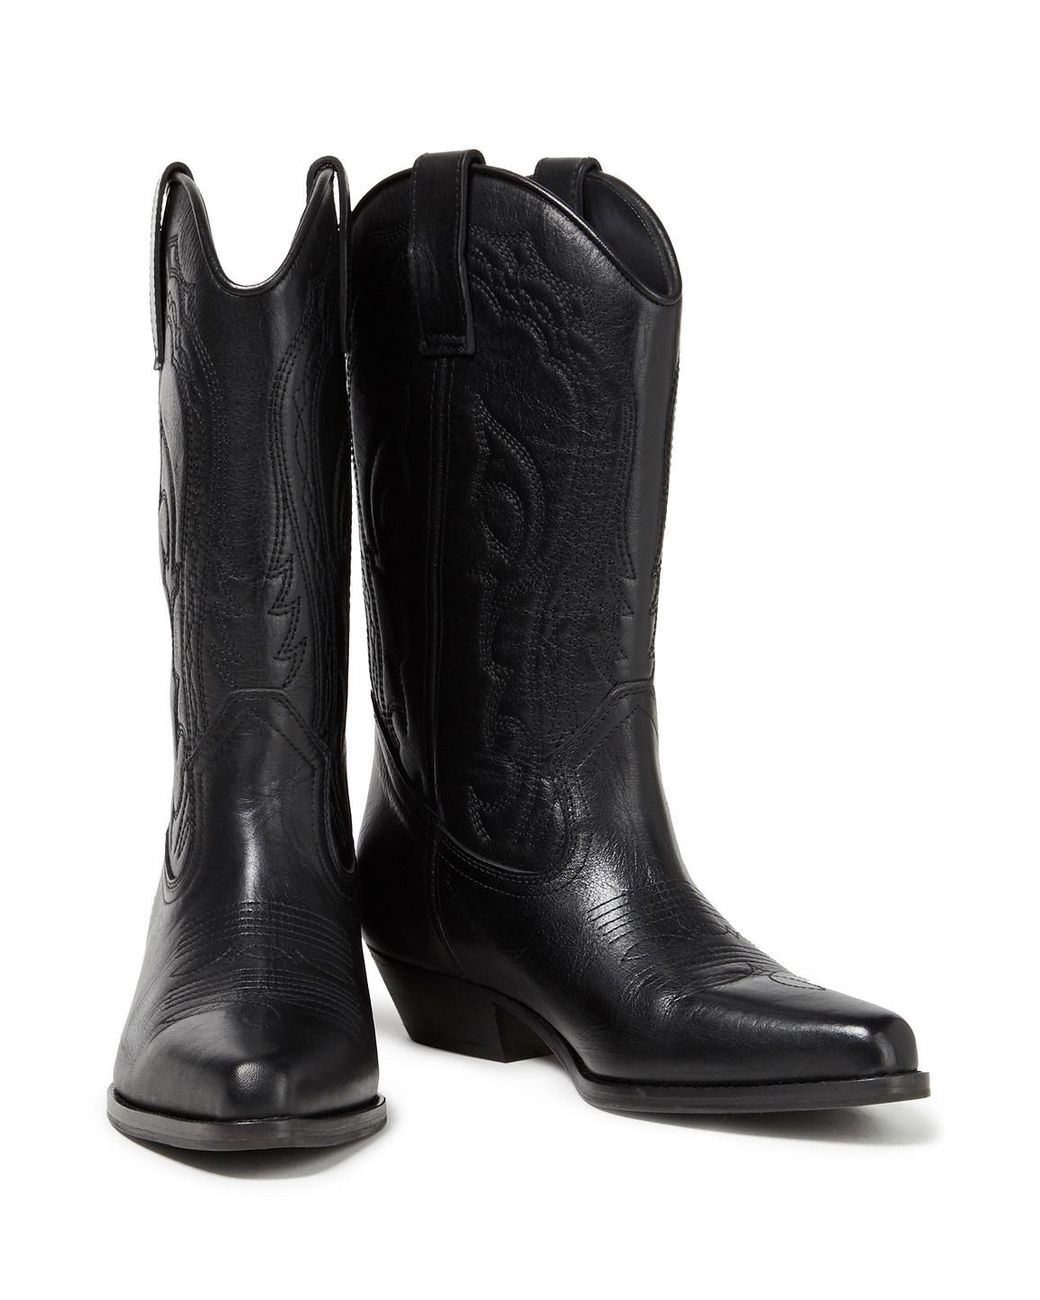 Ba&sh Cruz Embroidered Leather Boots in Black | Lyst